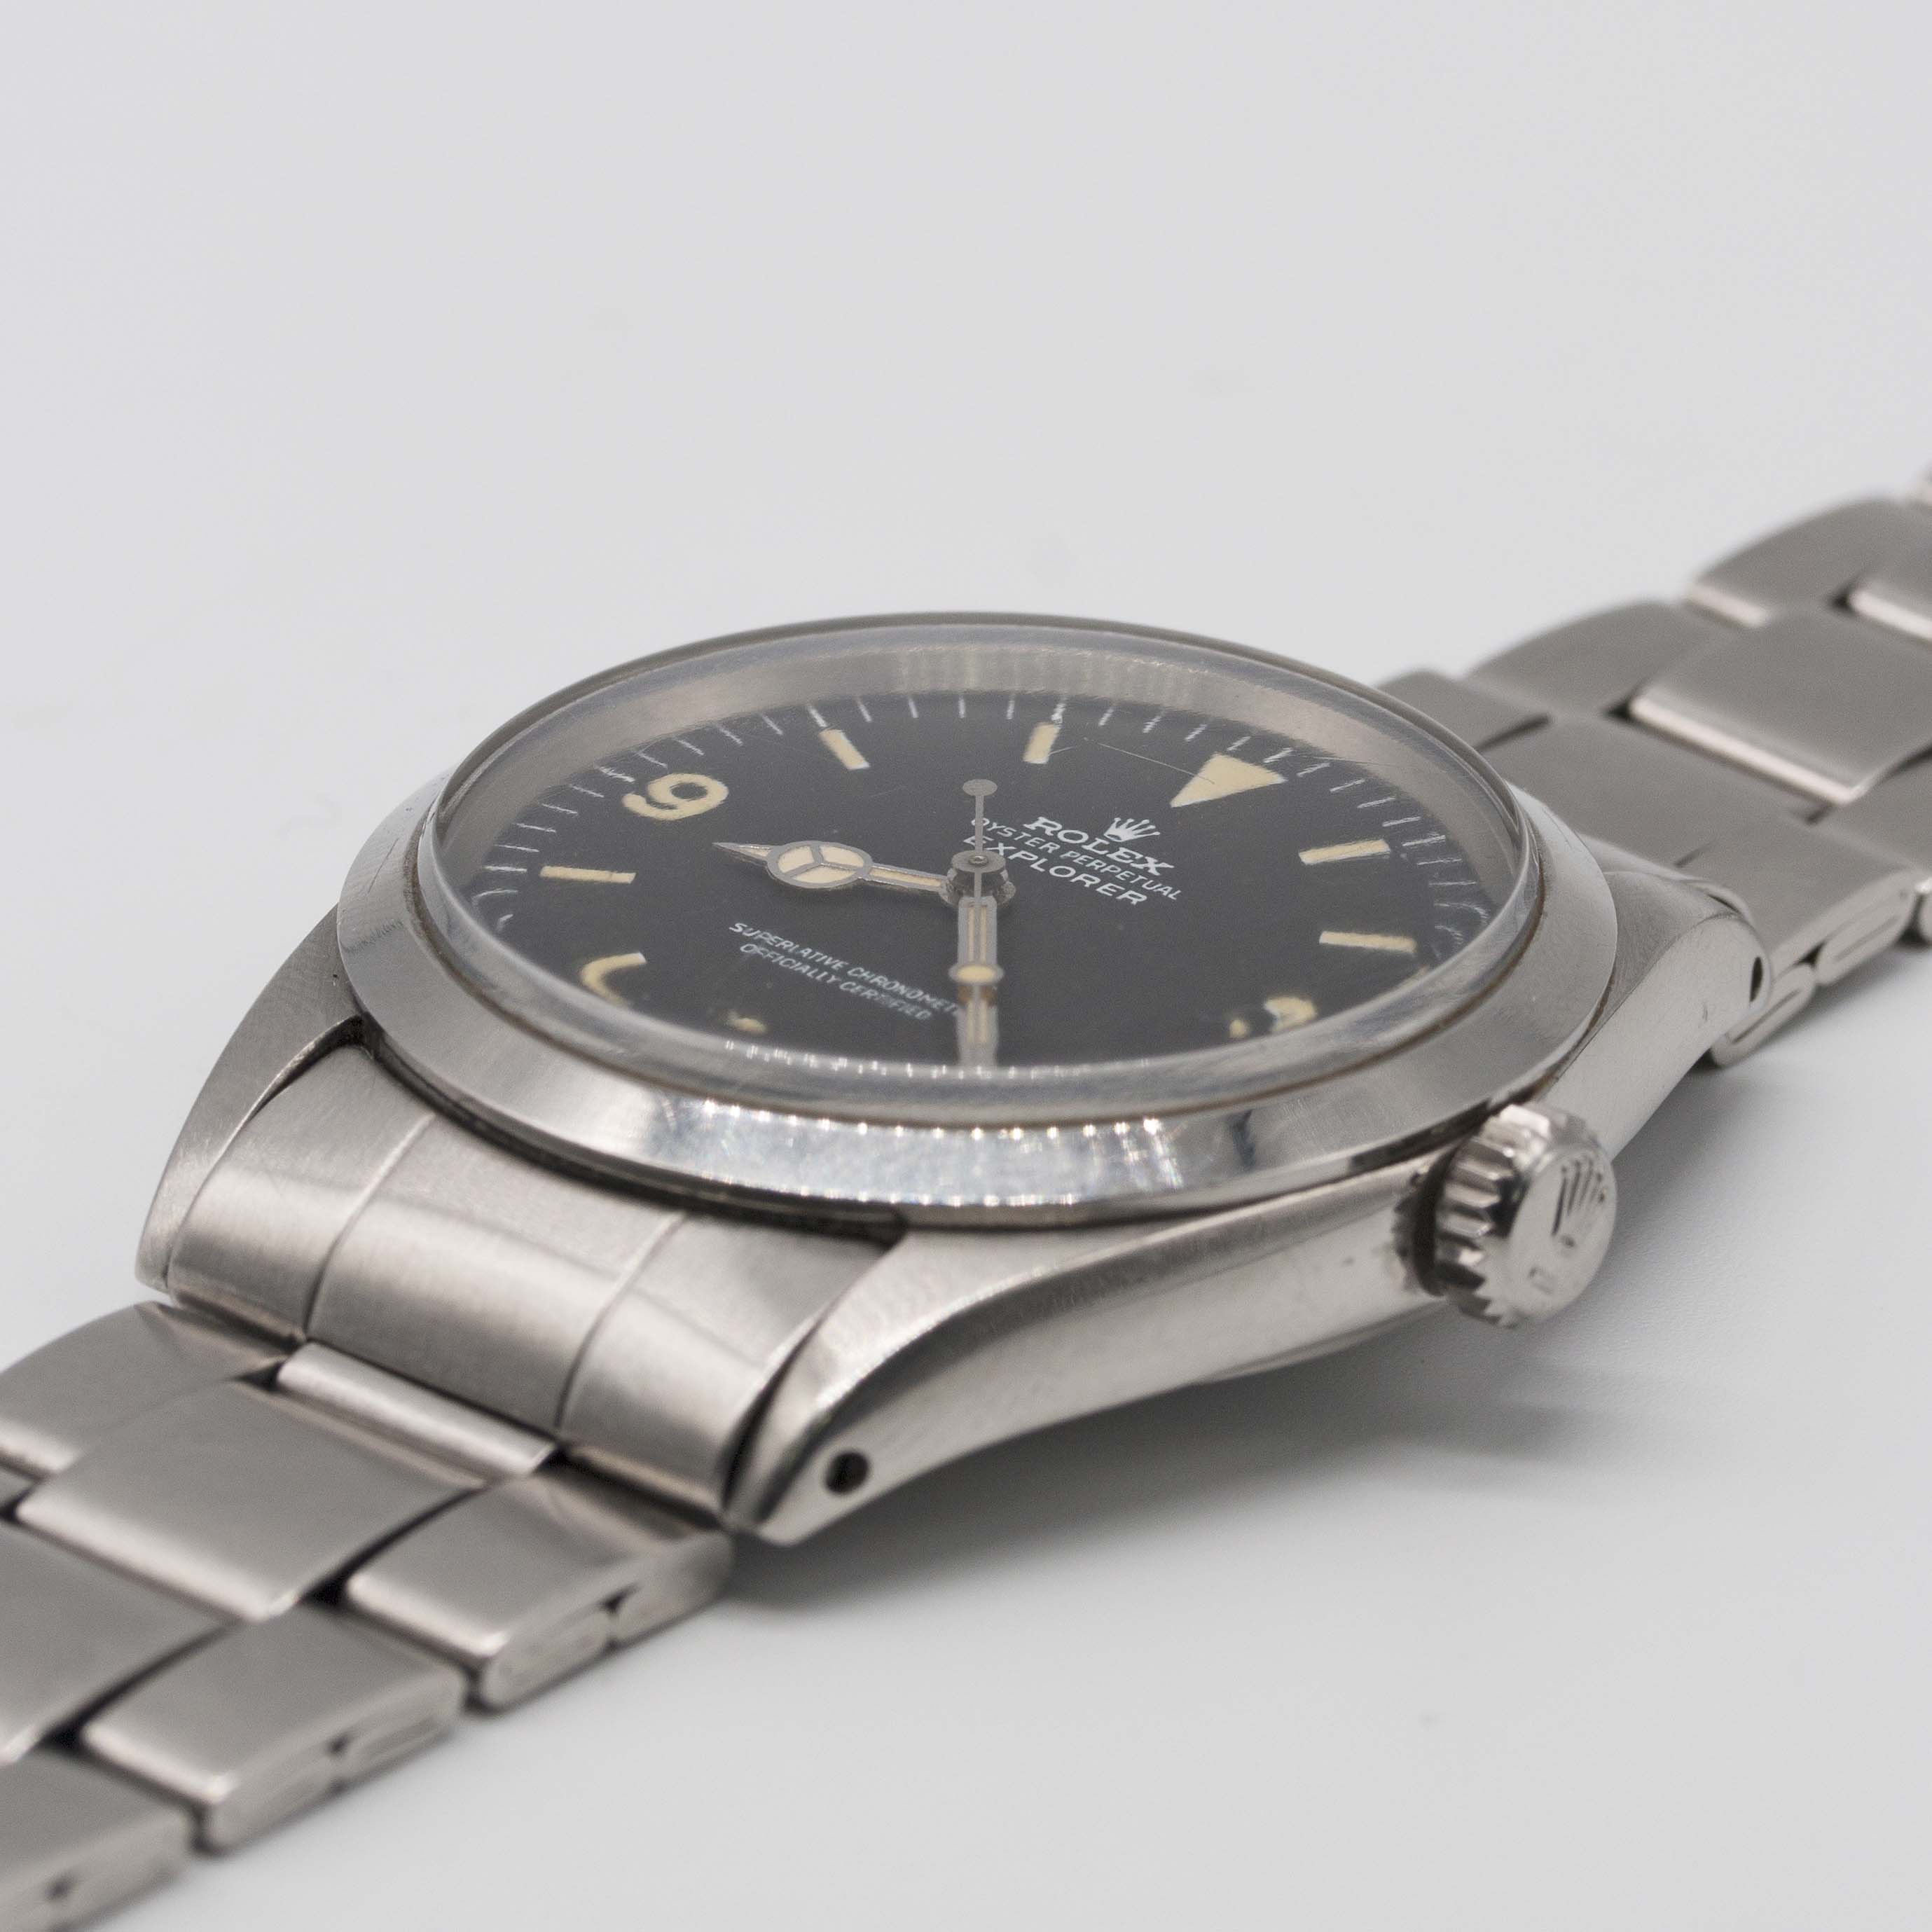 A RARE GENTLEMAN'S STAINLESS STEEL ROLEX OYSTER PERPETUAL EXPLORER BRACELET WATCH CIRCA 1972, REF. - Image 5 of 13